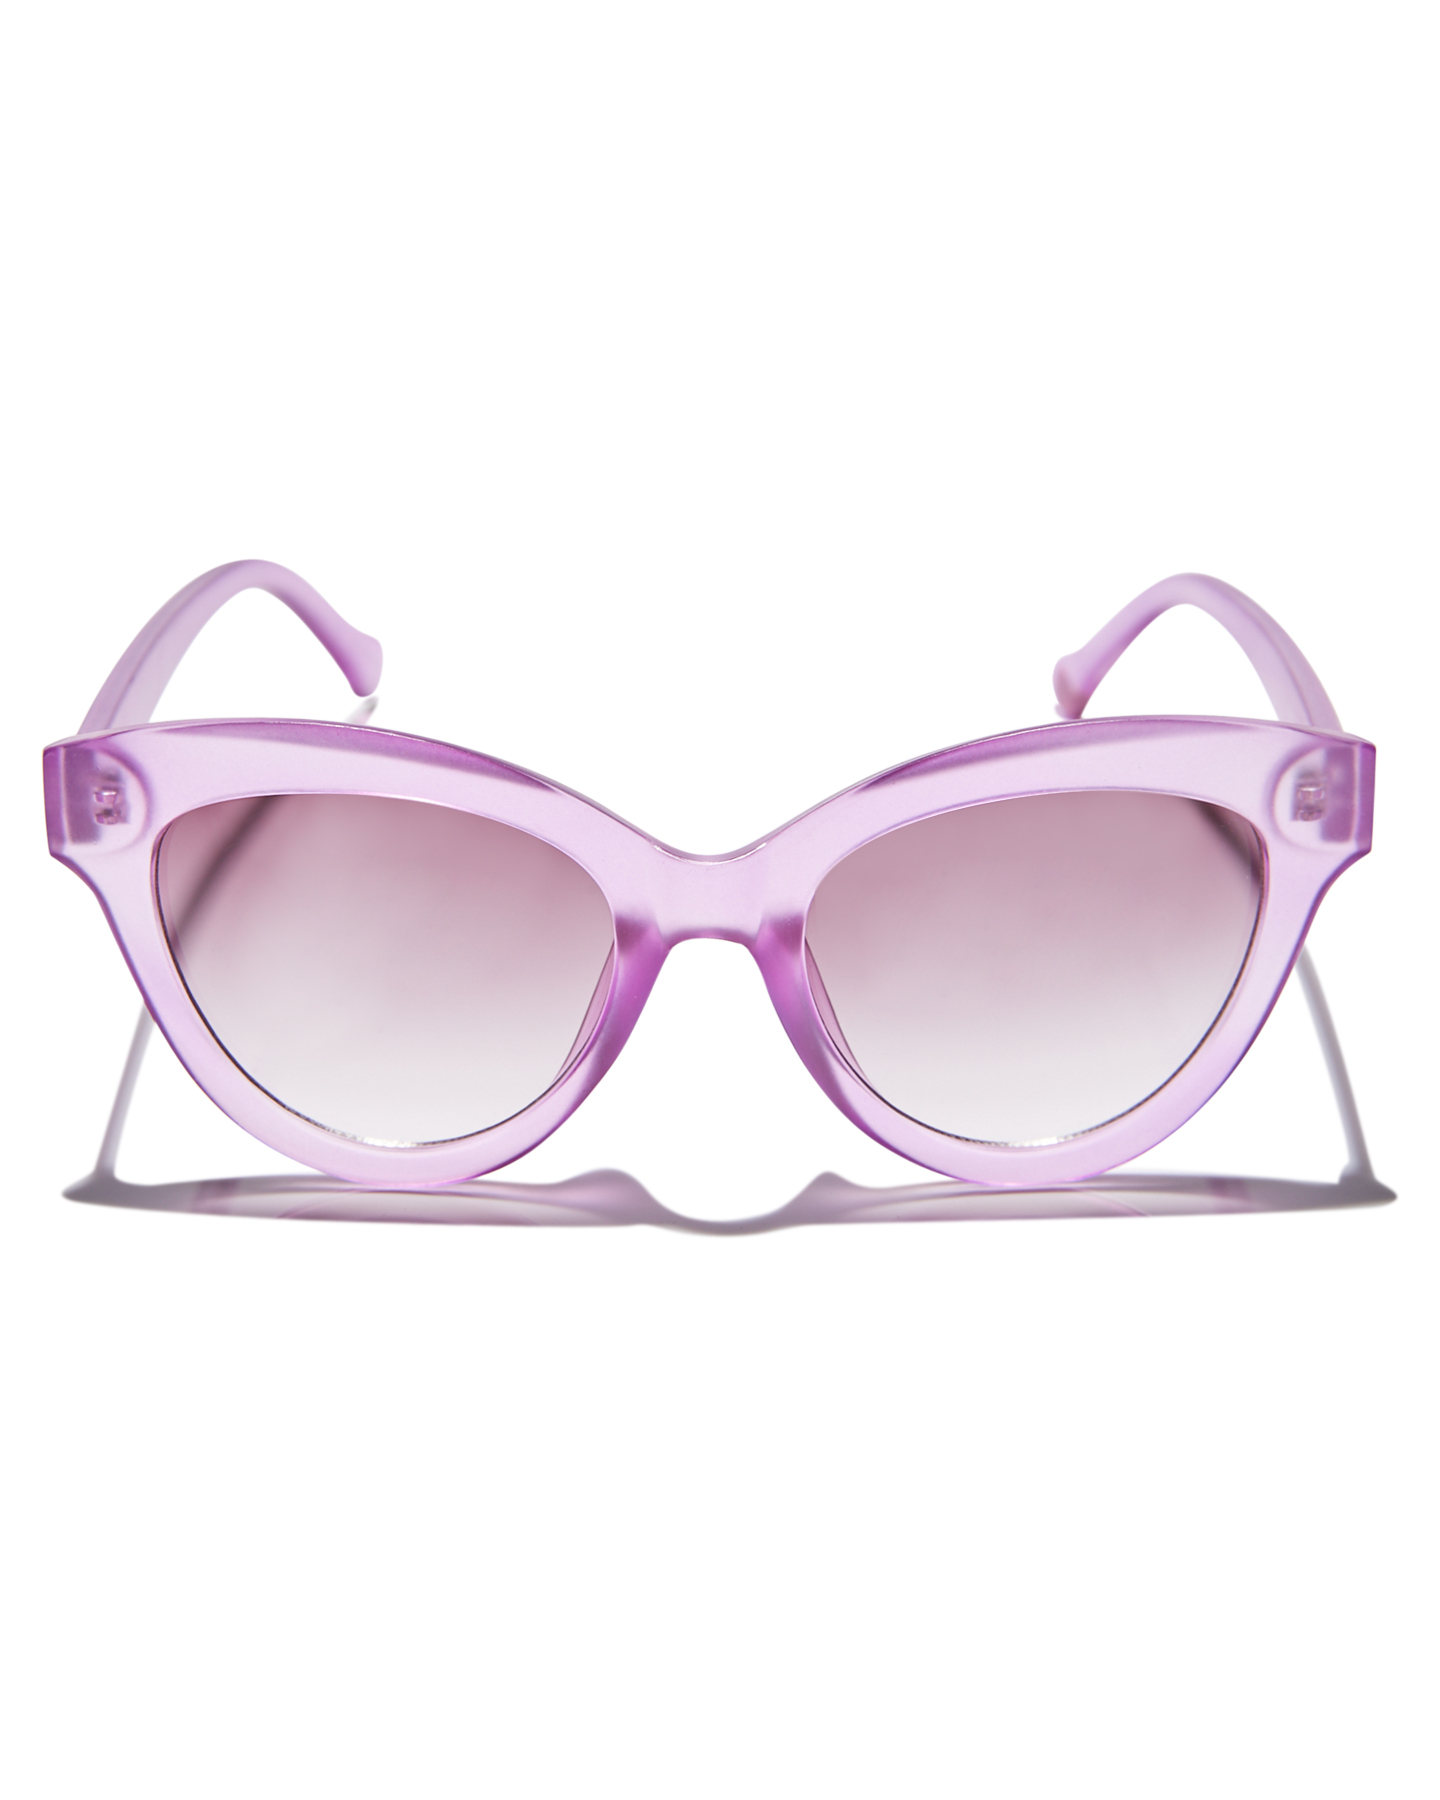 Seafolly Coral Bay Sunglasses - Lilac | SurfStitch